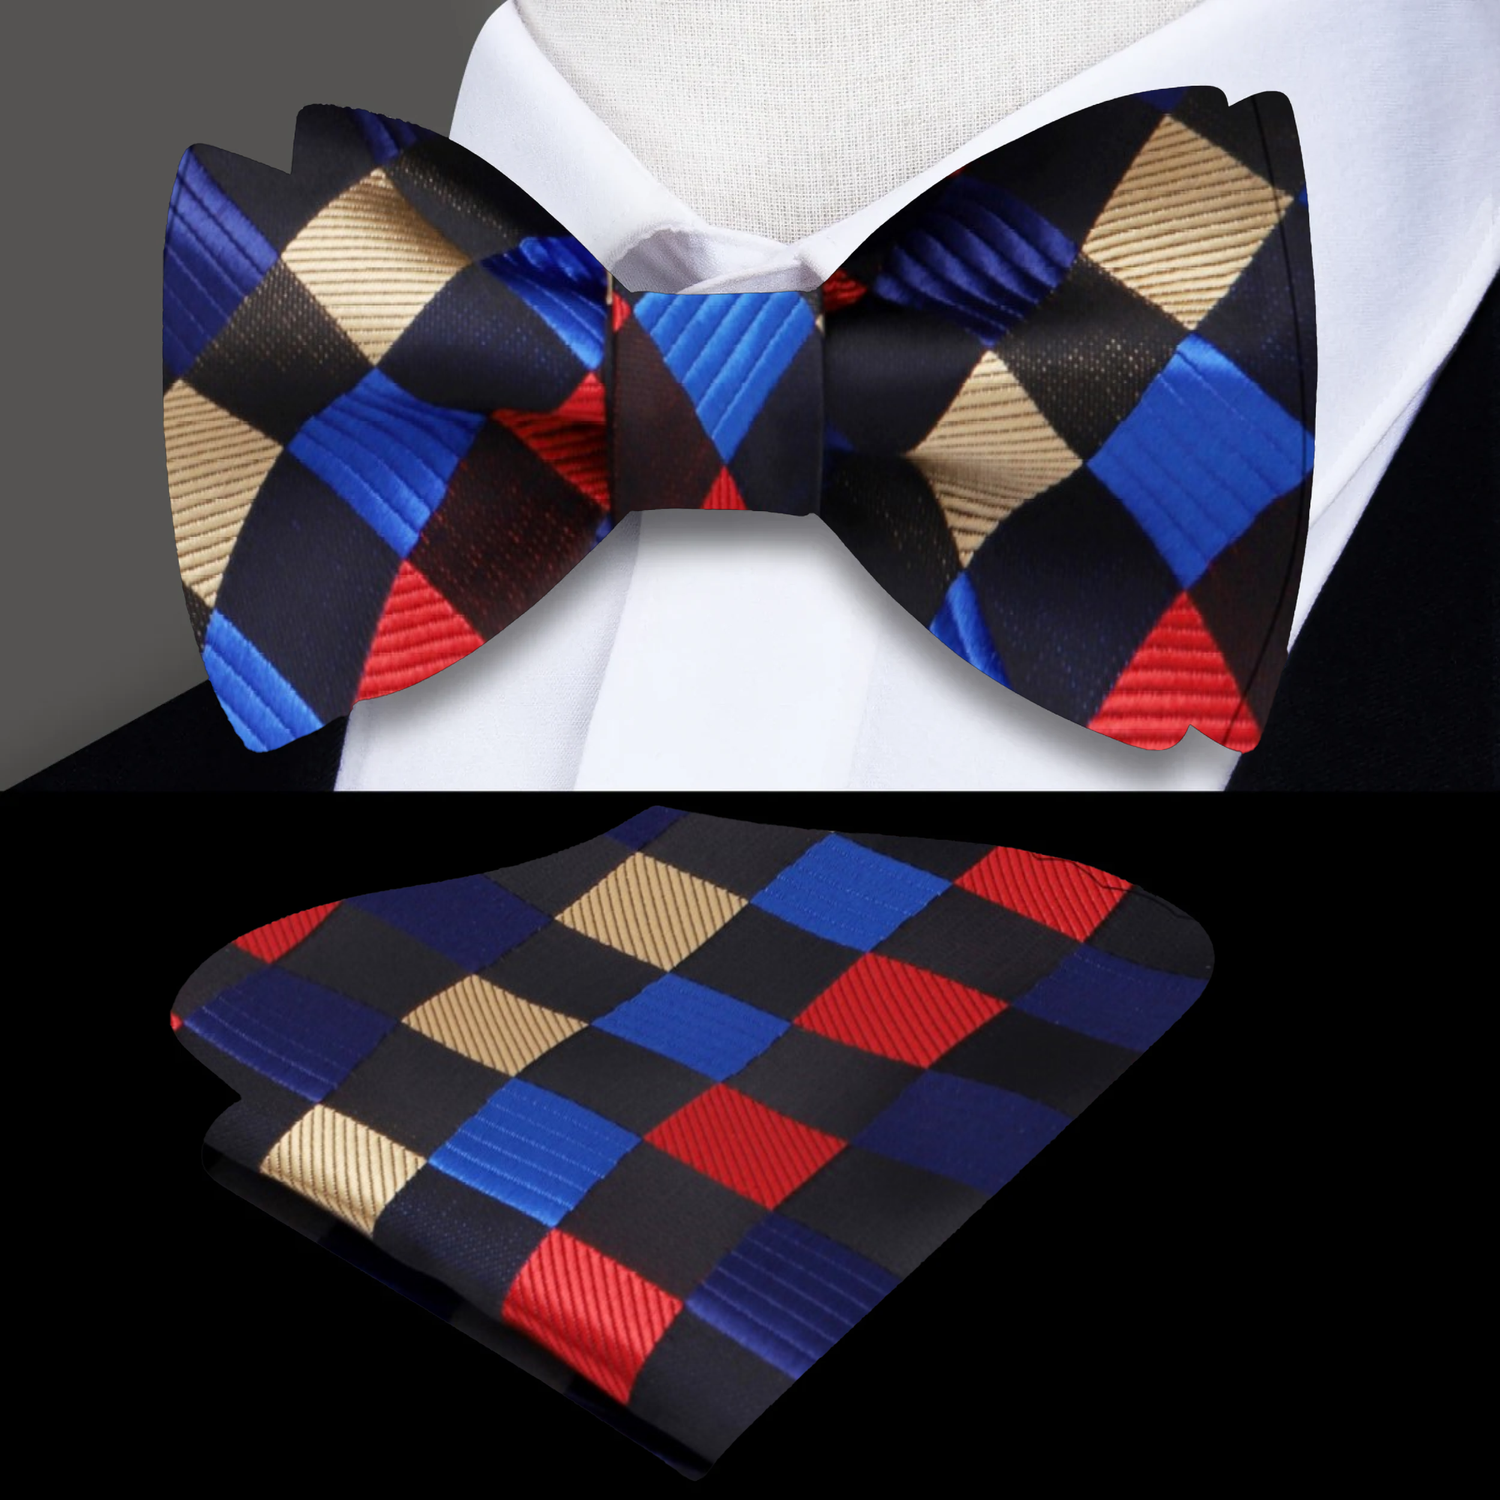 Black, Blue, Yellow and Red Geometric Bow Tie and Pocket Square